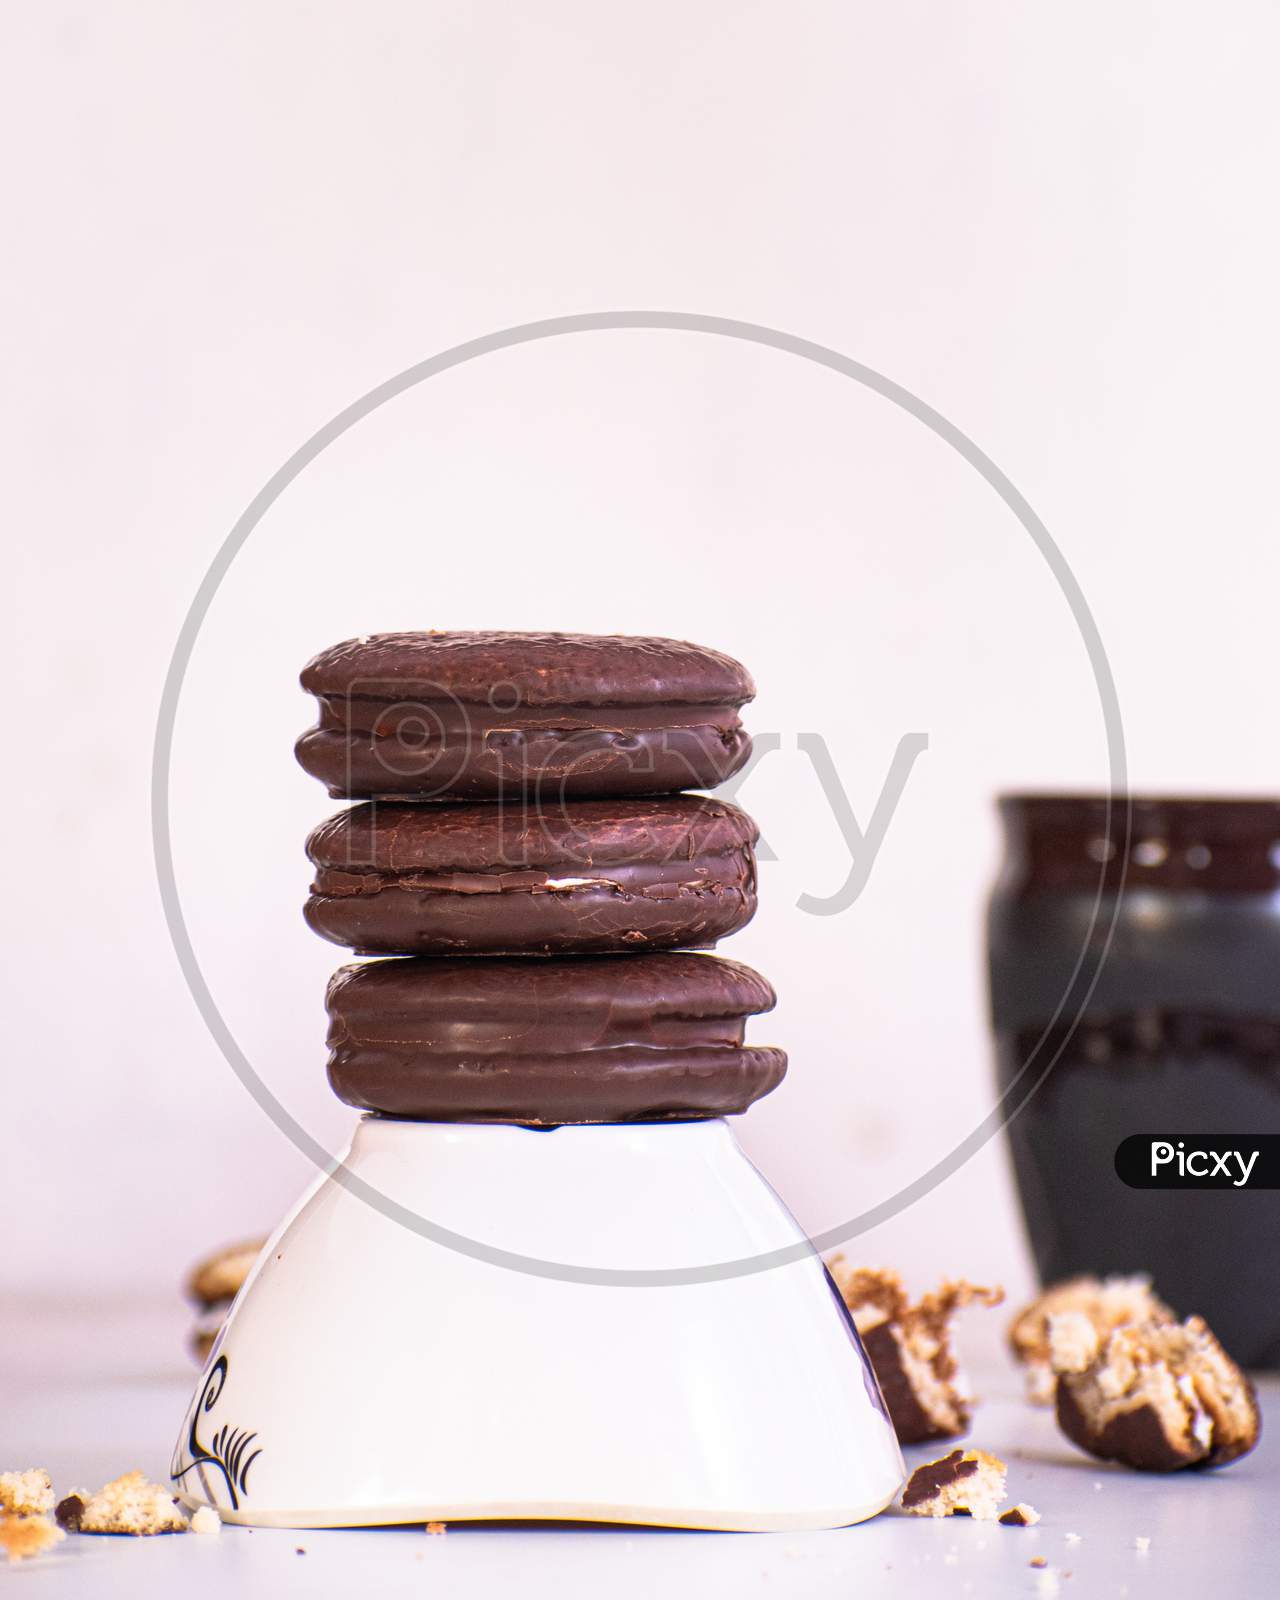 Food photography of lotte choco pie with cup, bowl, some stuffs using white background